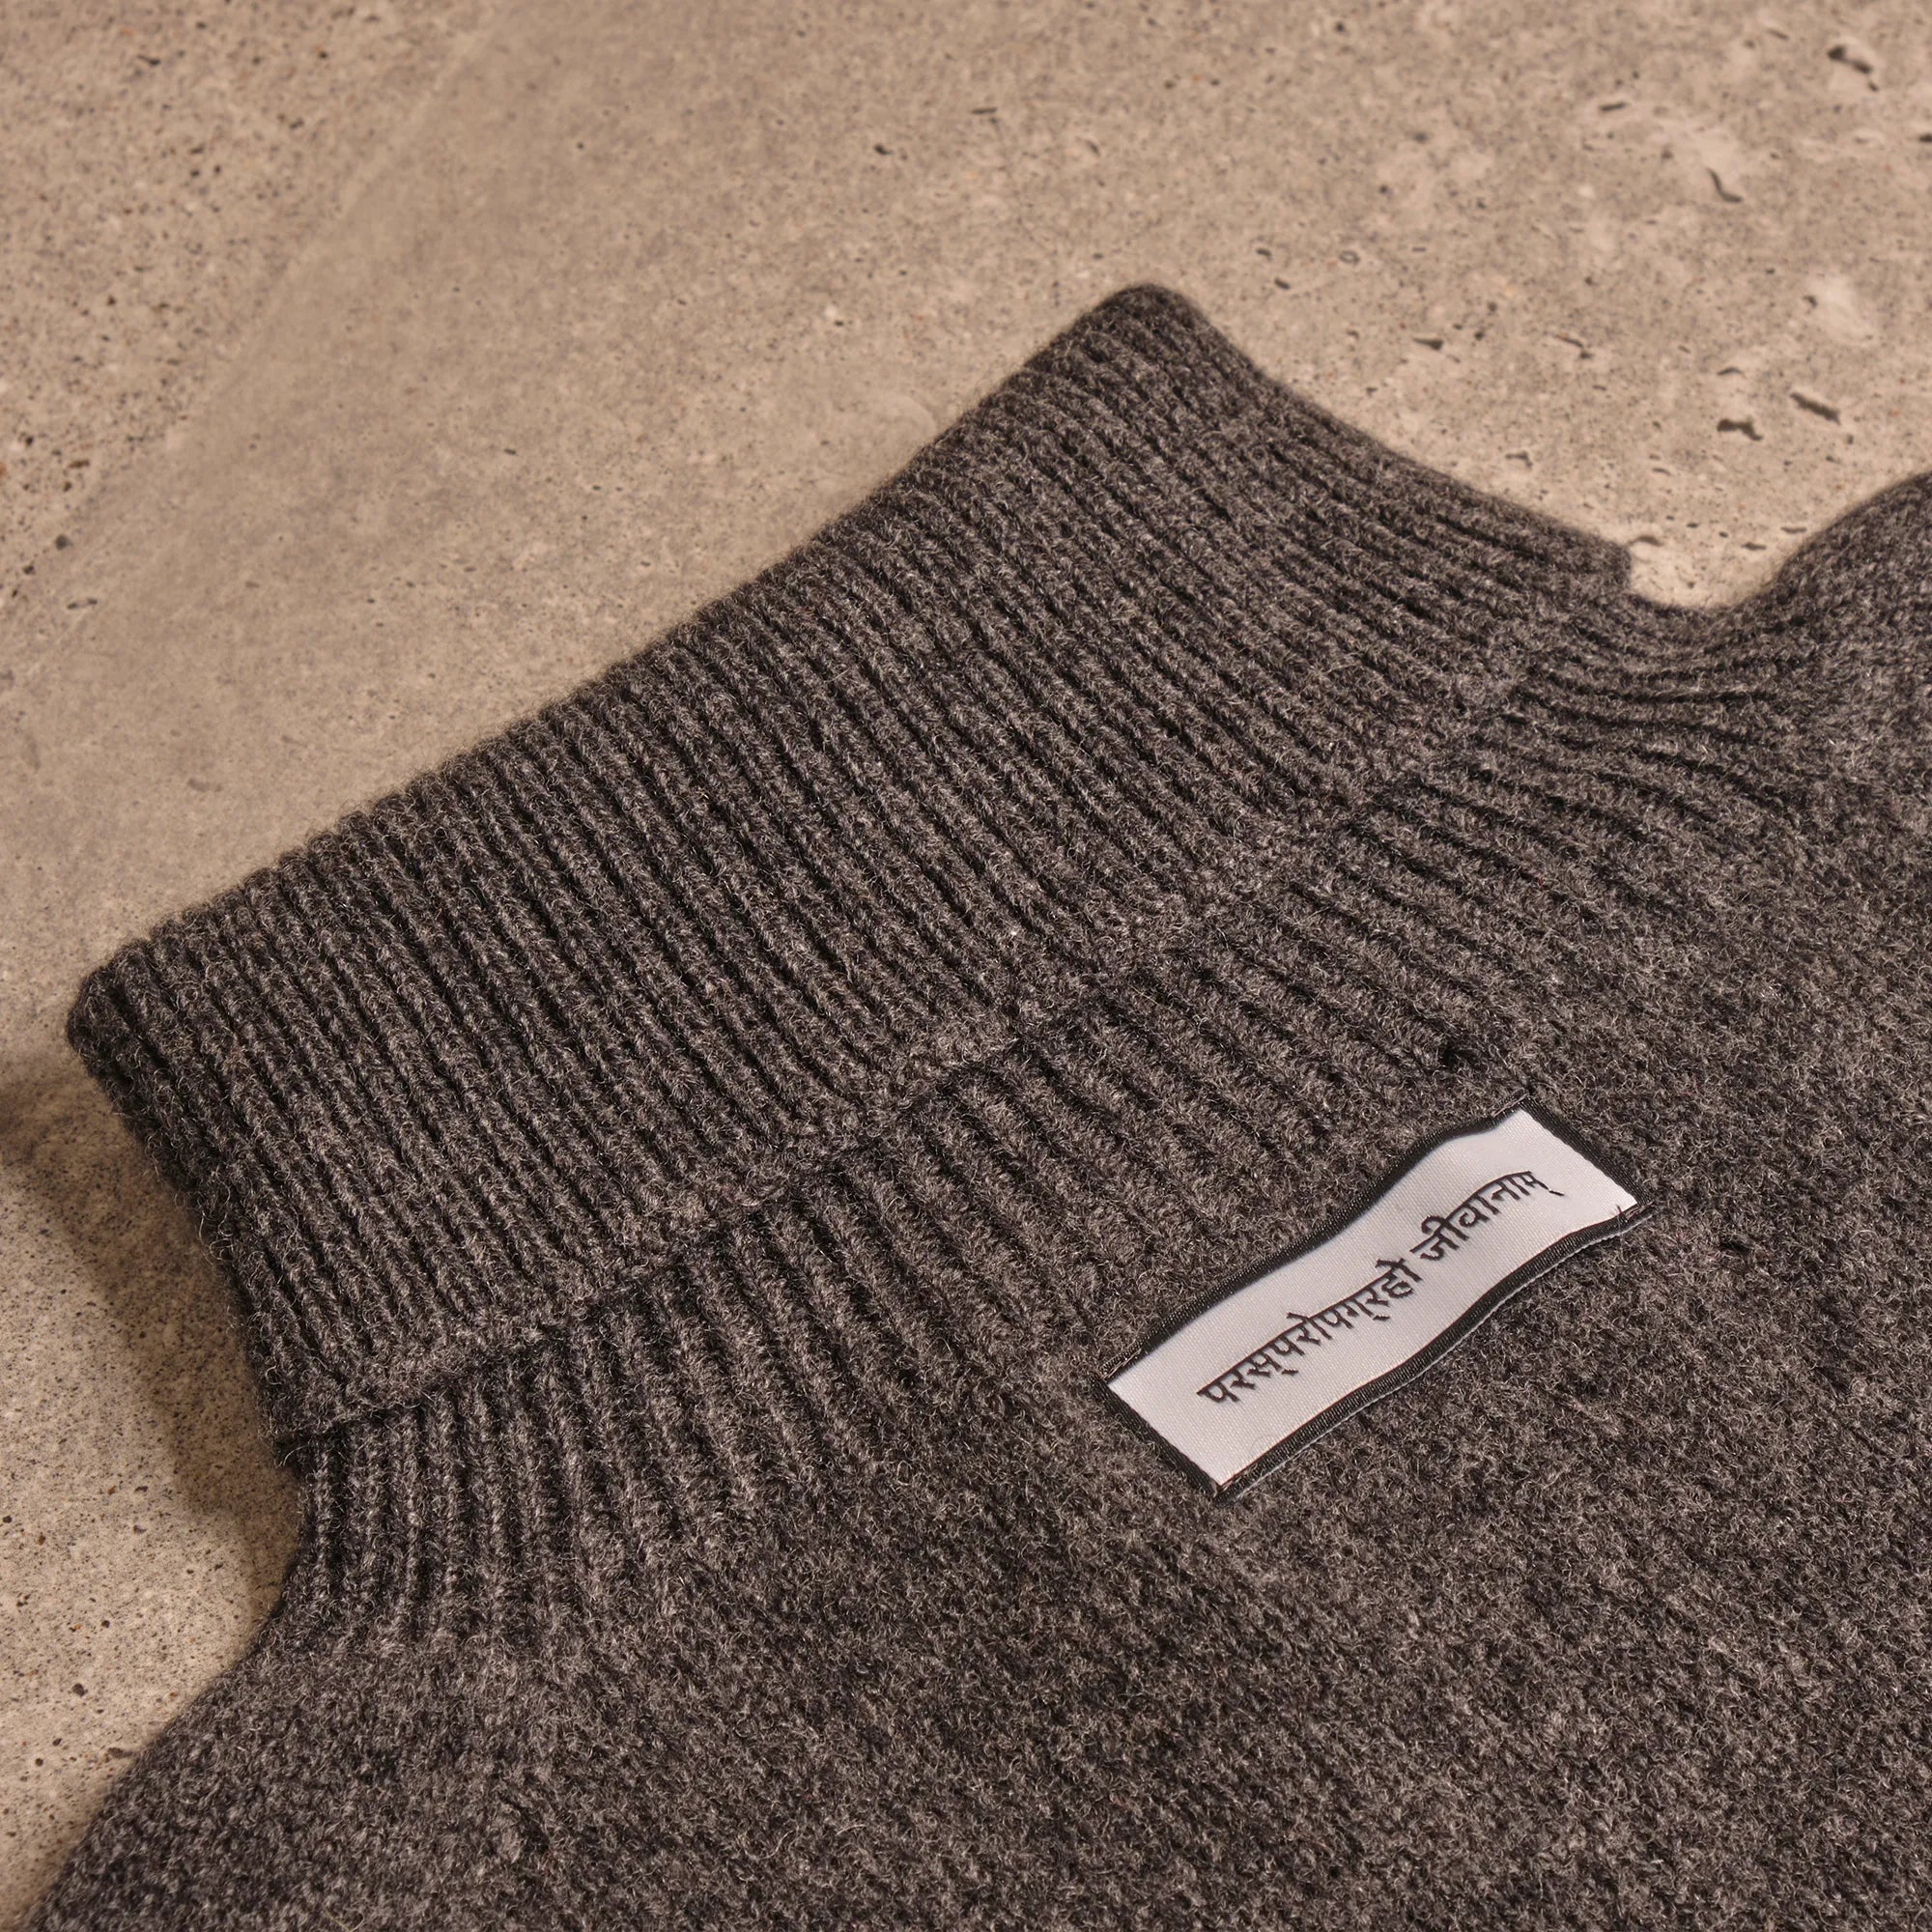 Grey Merino Wool and Cashmere Roll Neck Jumper